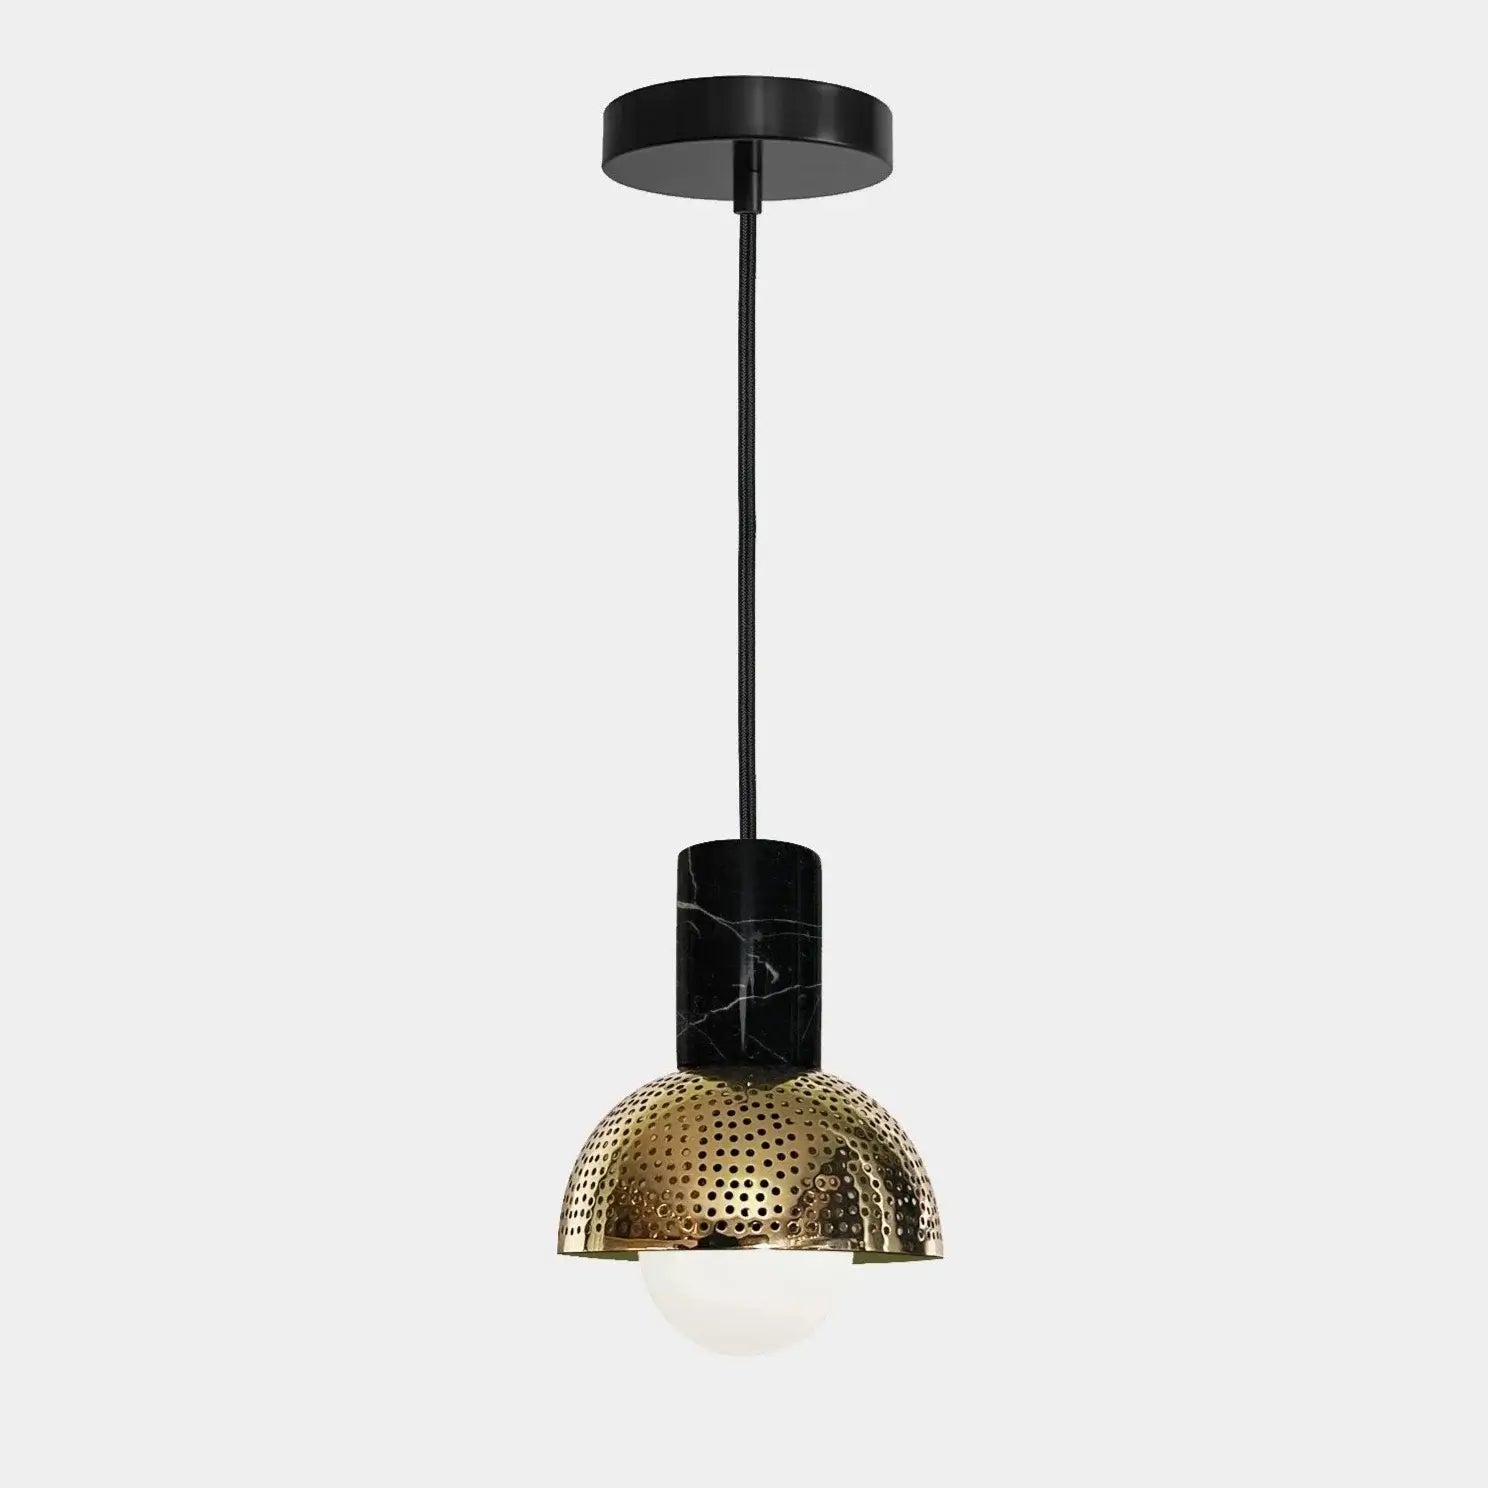 Dounia home Pendant light in Polished brass  made of Metal, Model: maria marble dome